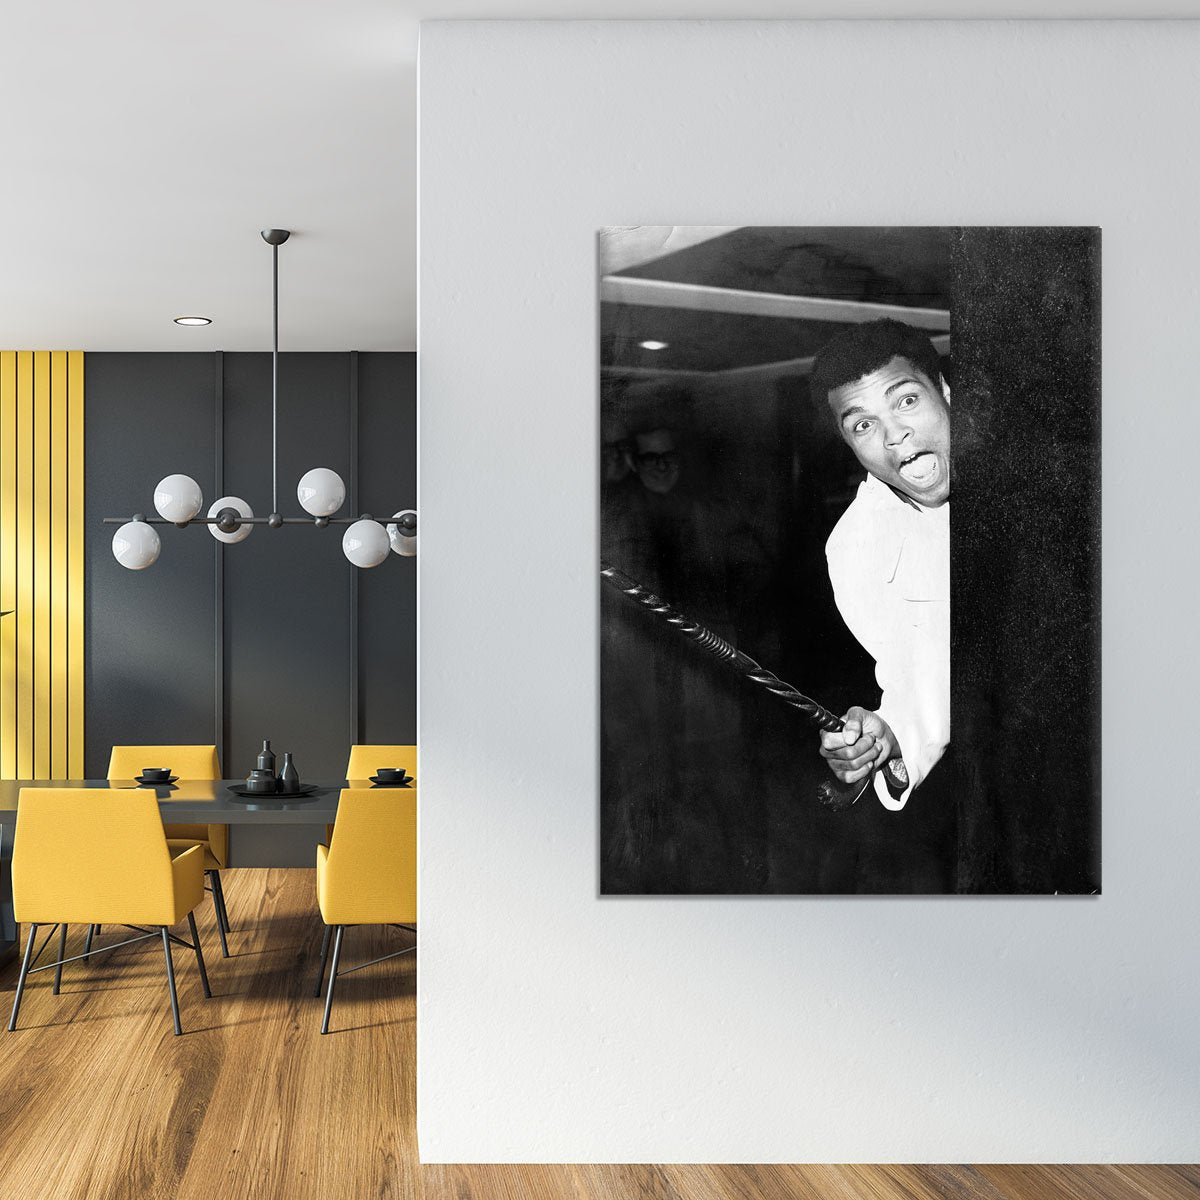 Muhammad Ali larking about at Heathrow Canvas Print or Poster